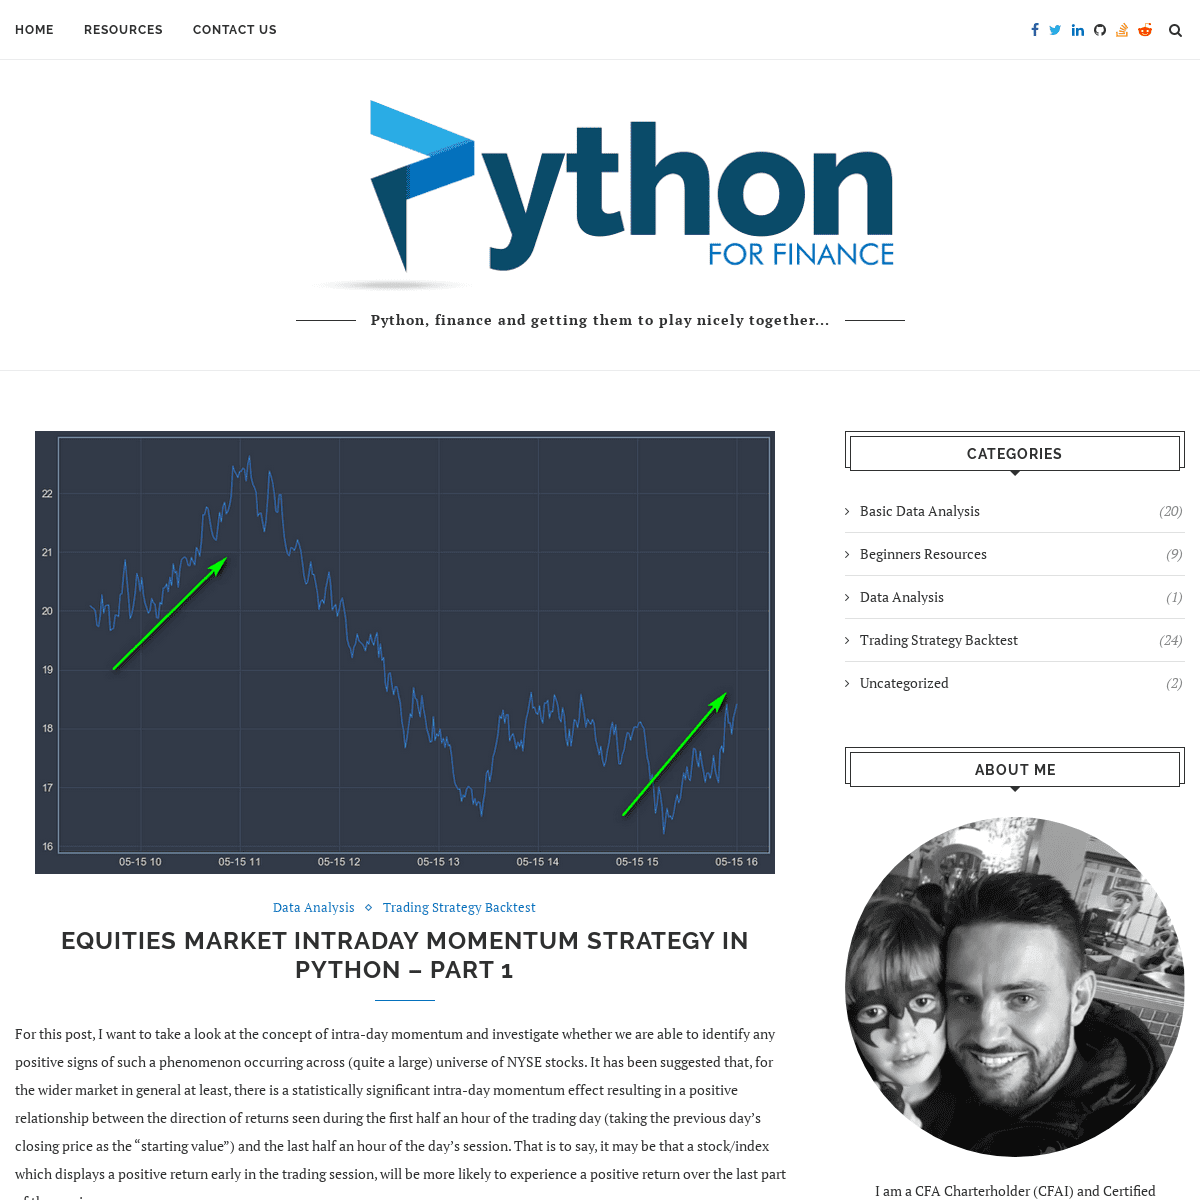 A complete backup of pythonforfinance.net